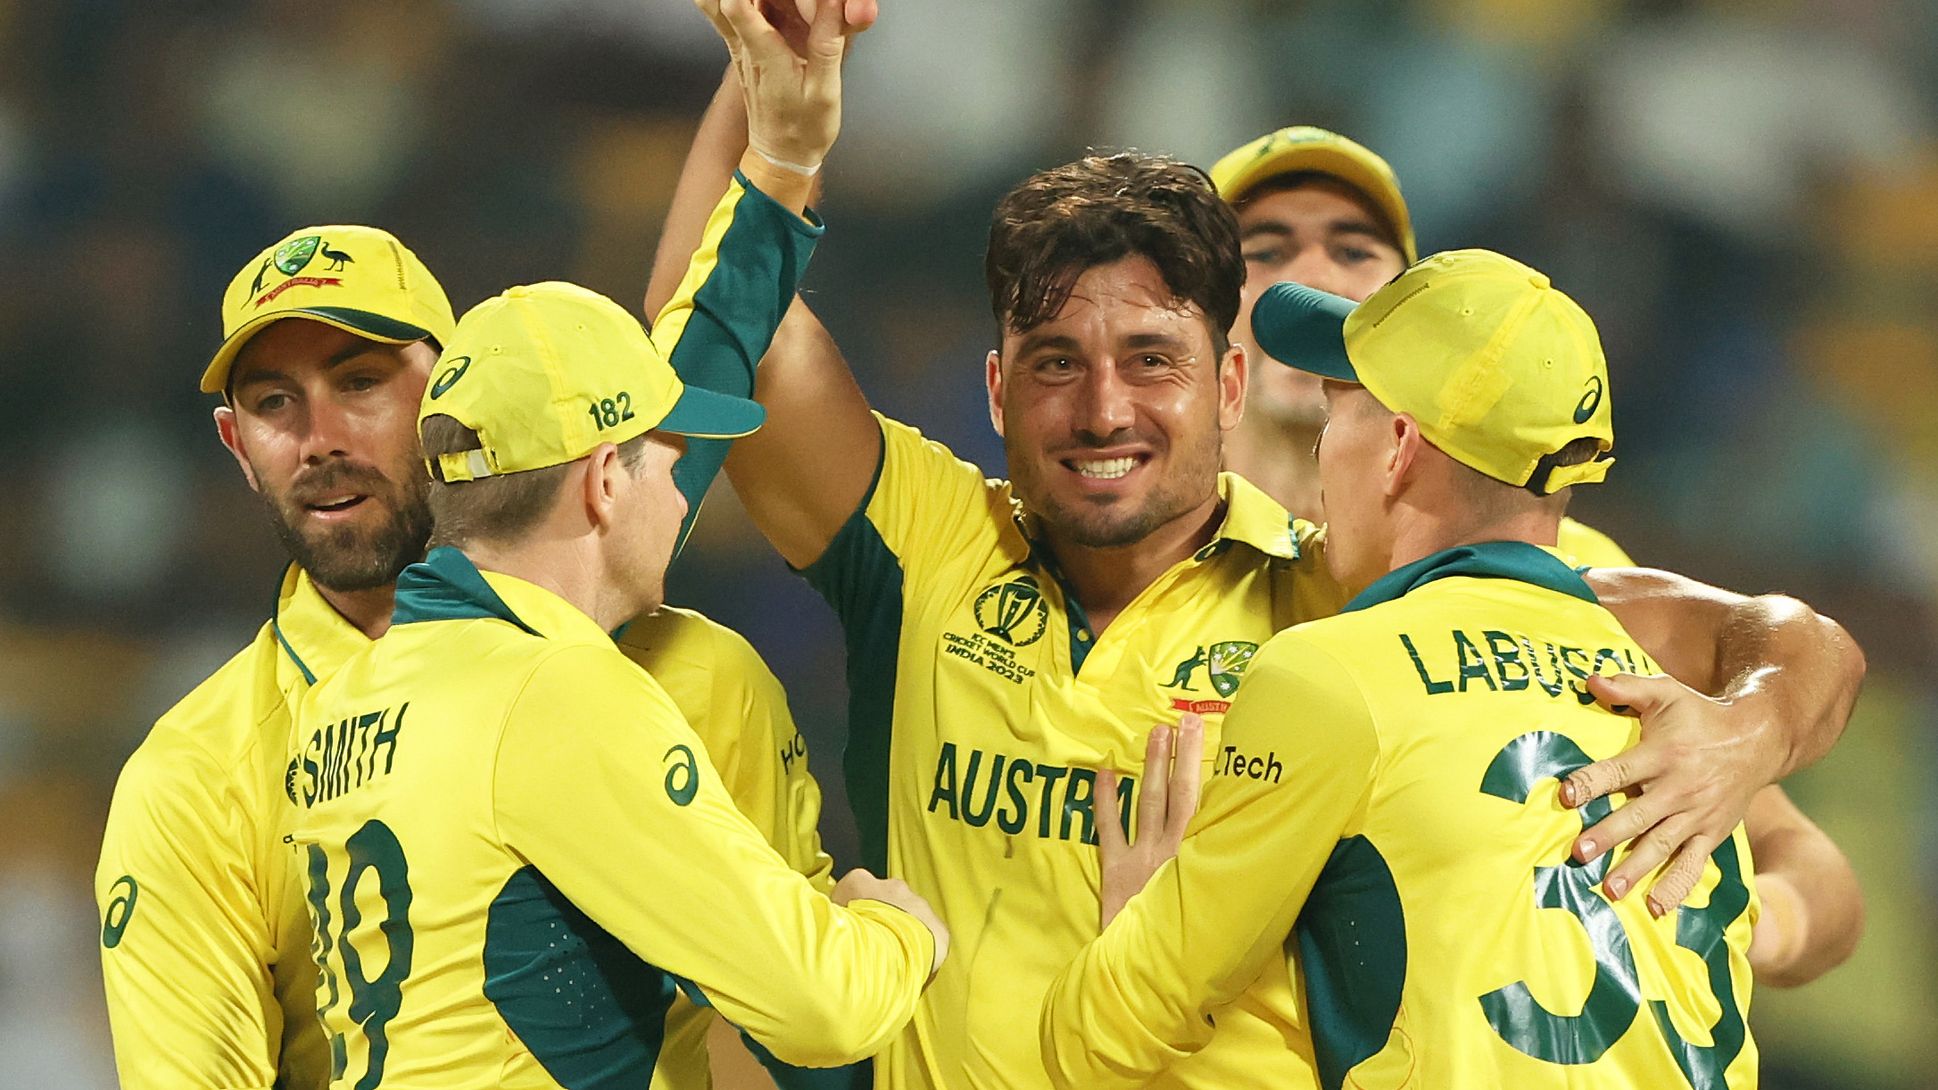 Marcus Stoinis of Australia celebrates the wicket of Imam-ul-Haq of Pakistan during the ICC Men&#x27;s Cricket World Cup India 2023 between Australia and Pakistan at M. Chinnaswamy Stadium on October 20, 2023 in Bangalore, India. (Photo by Robert Cianflone/Getty Images)